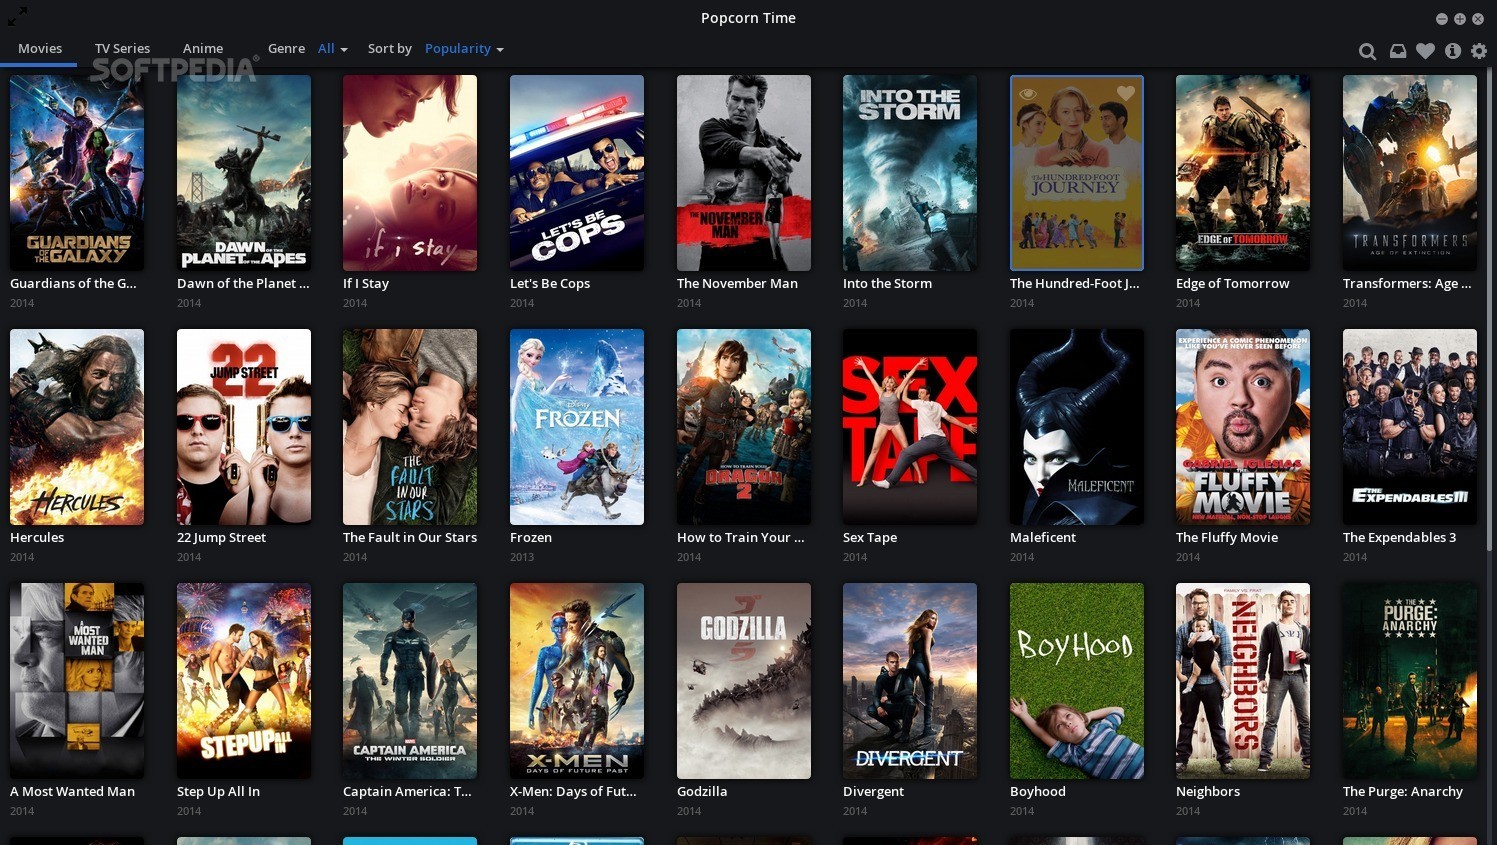 Watch Movies and TV Shows for Free with the Latest Popcorn Time